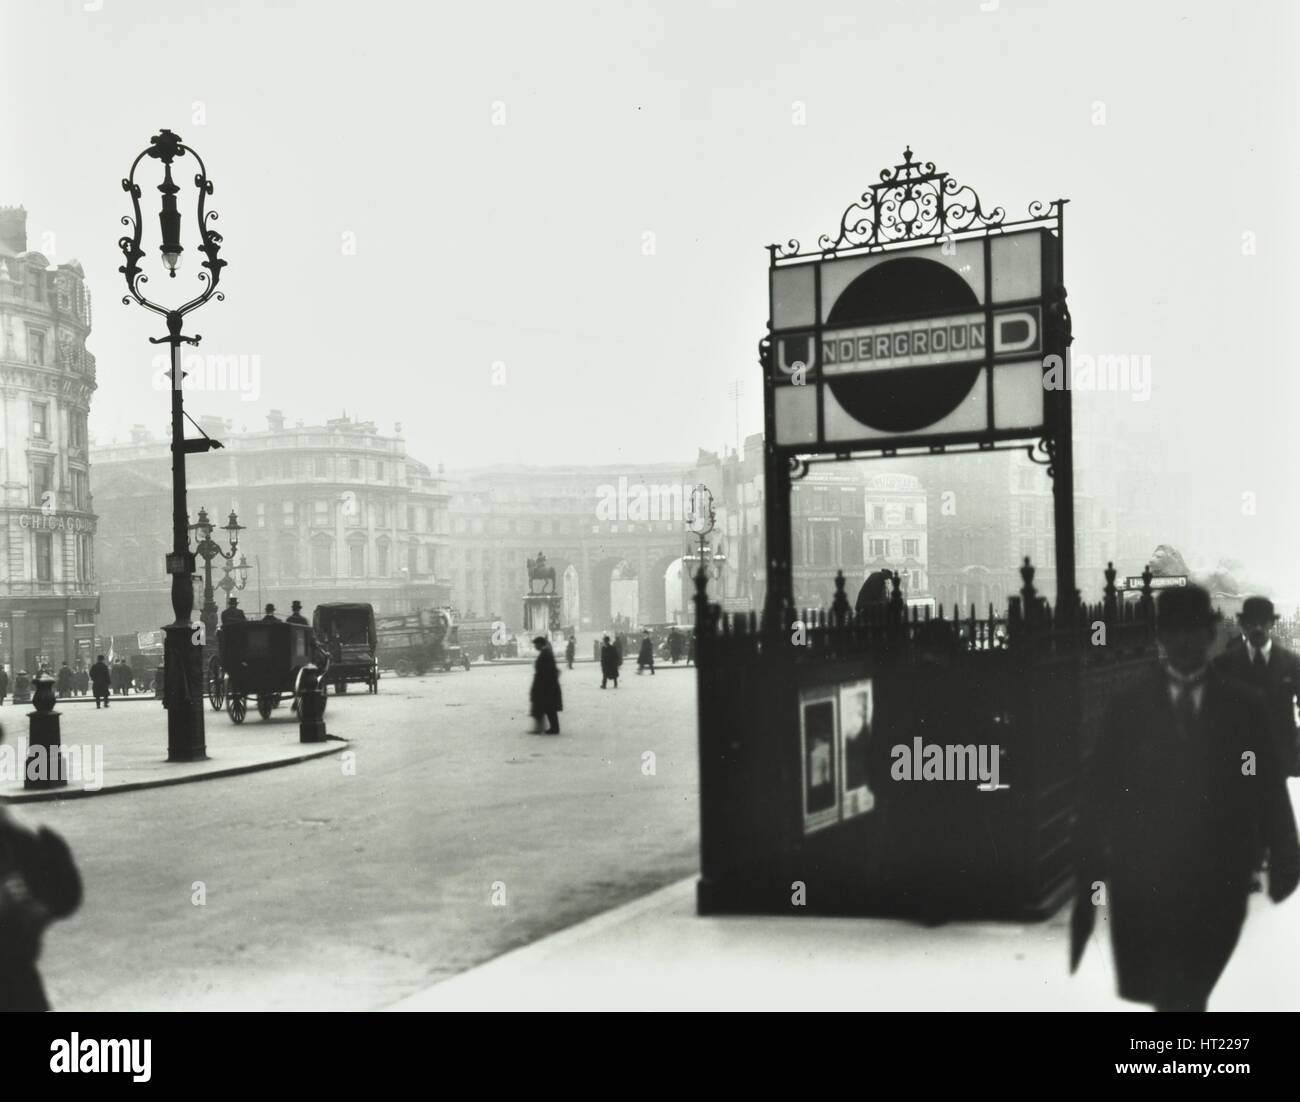 Trafalgar Square with Underground entrance and Admiralty Arch behind, London, 1913. Artist: Unknown. Stock Photo